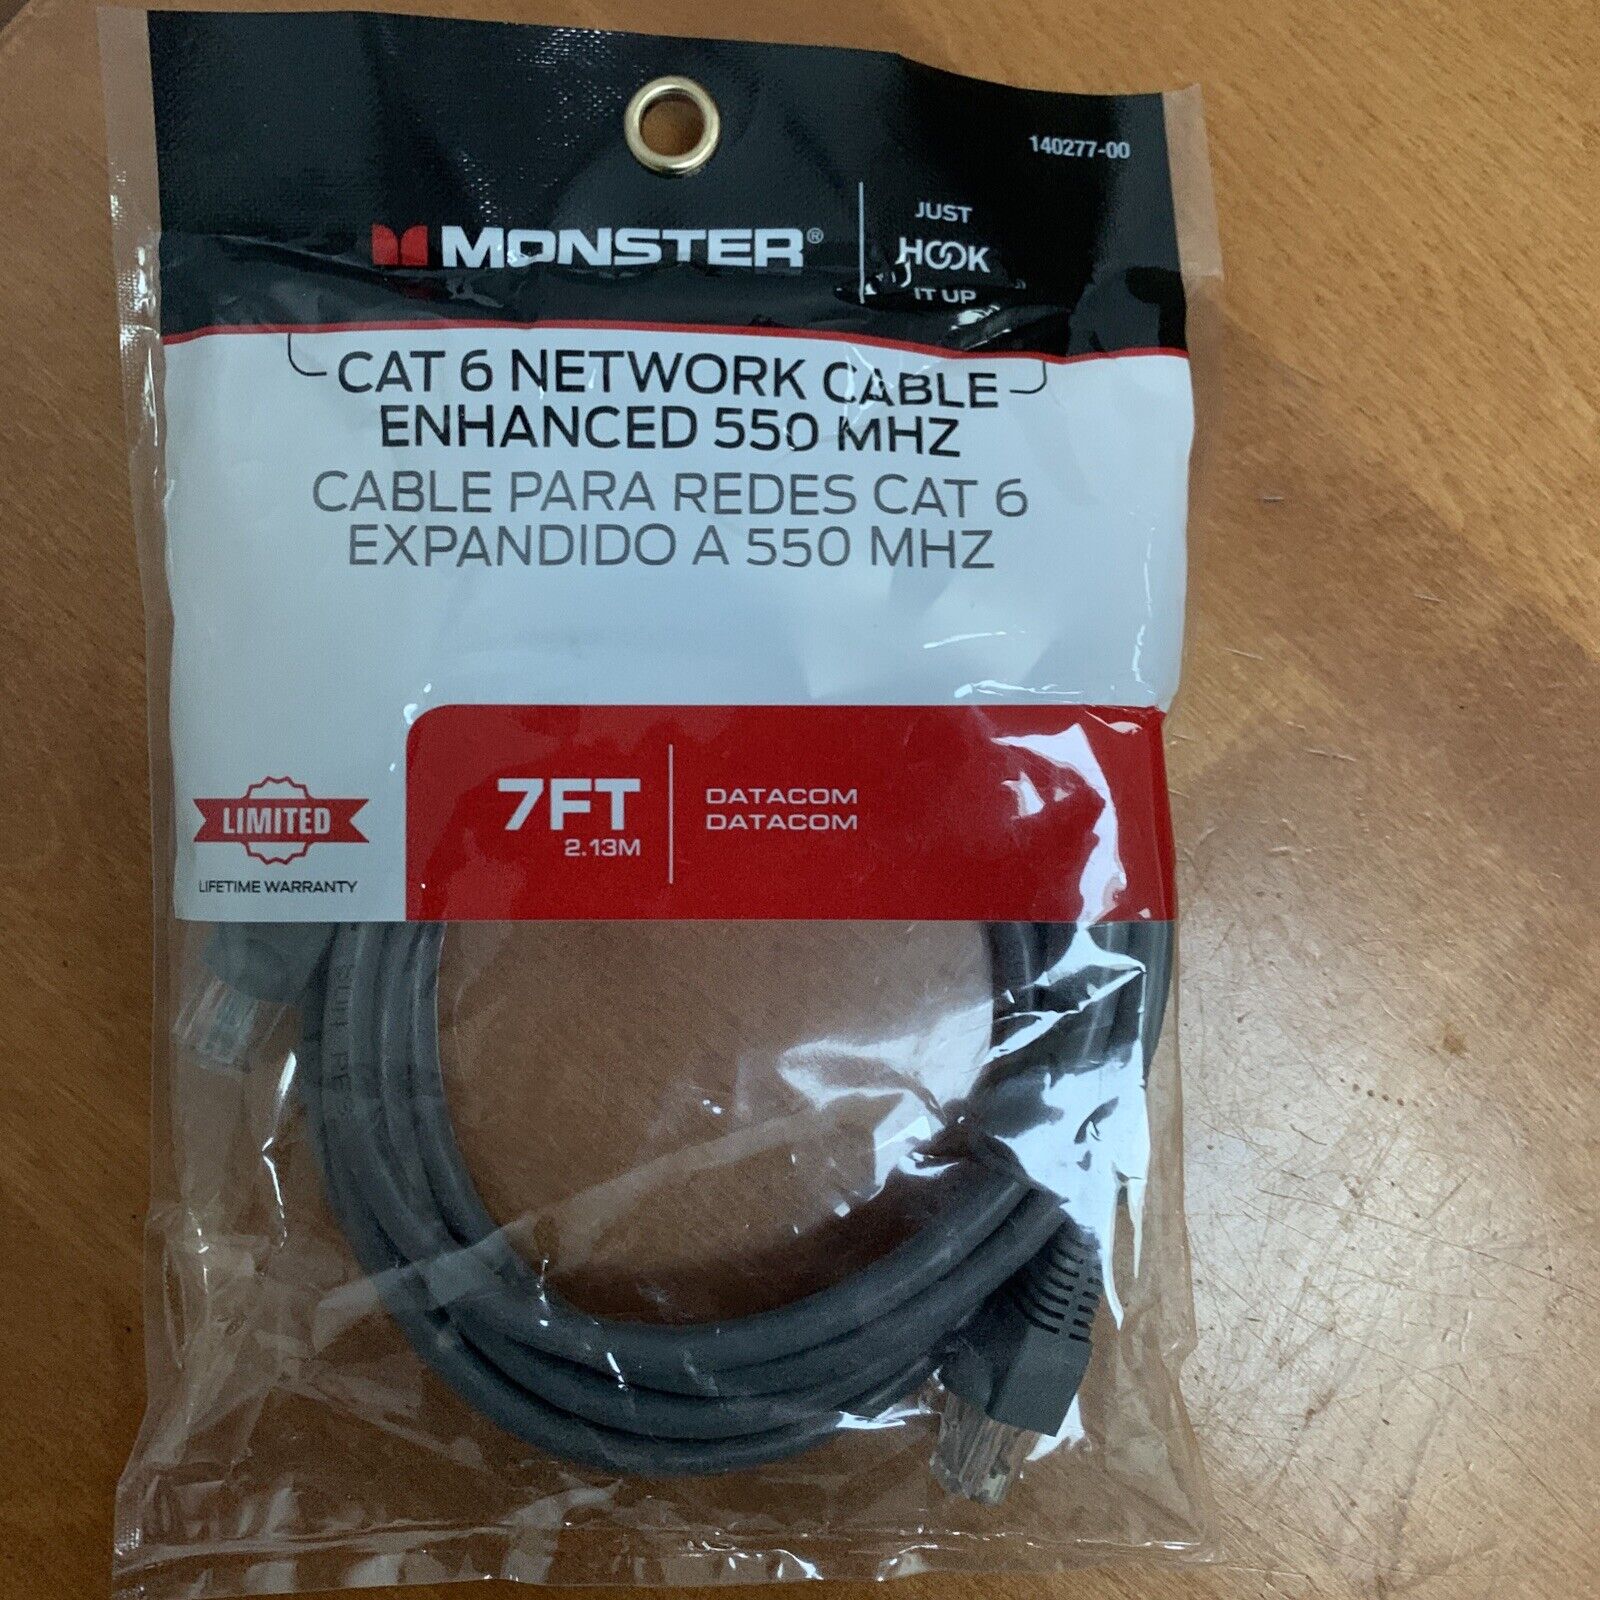 Monster  Cat, Six Networking Cable, 7 Feet Product 140277-00￼